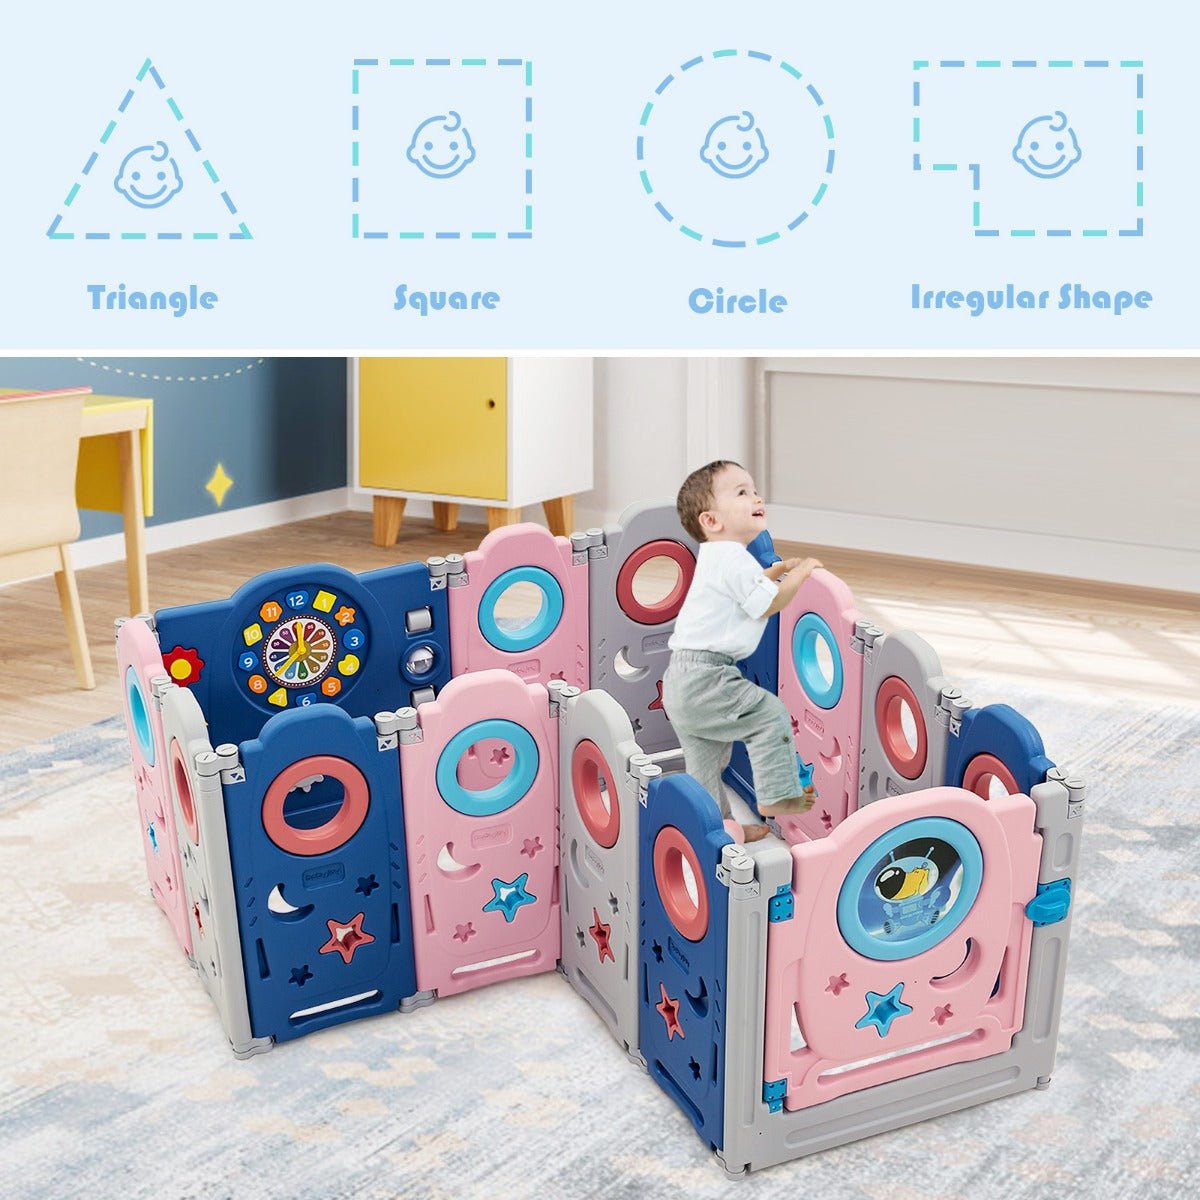 Secure Living Room Baby Playpen with Door Lock for Playtime Confidence